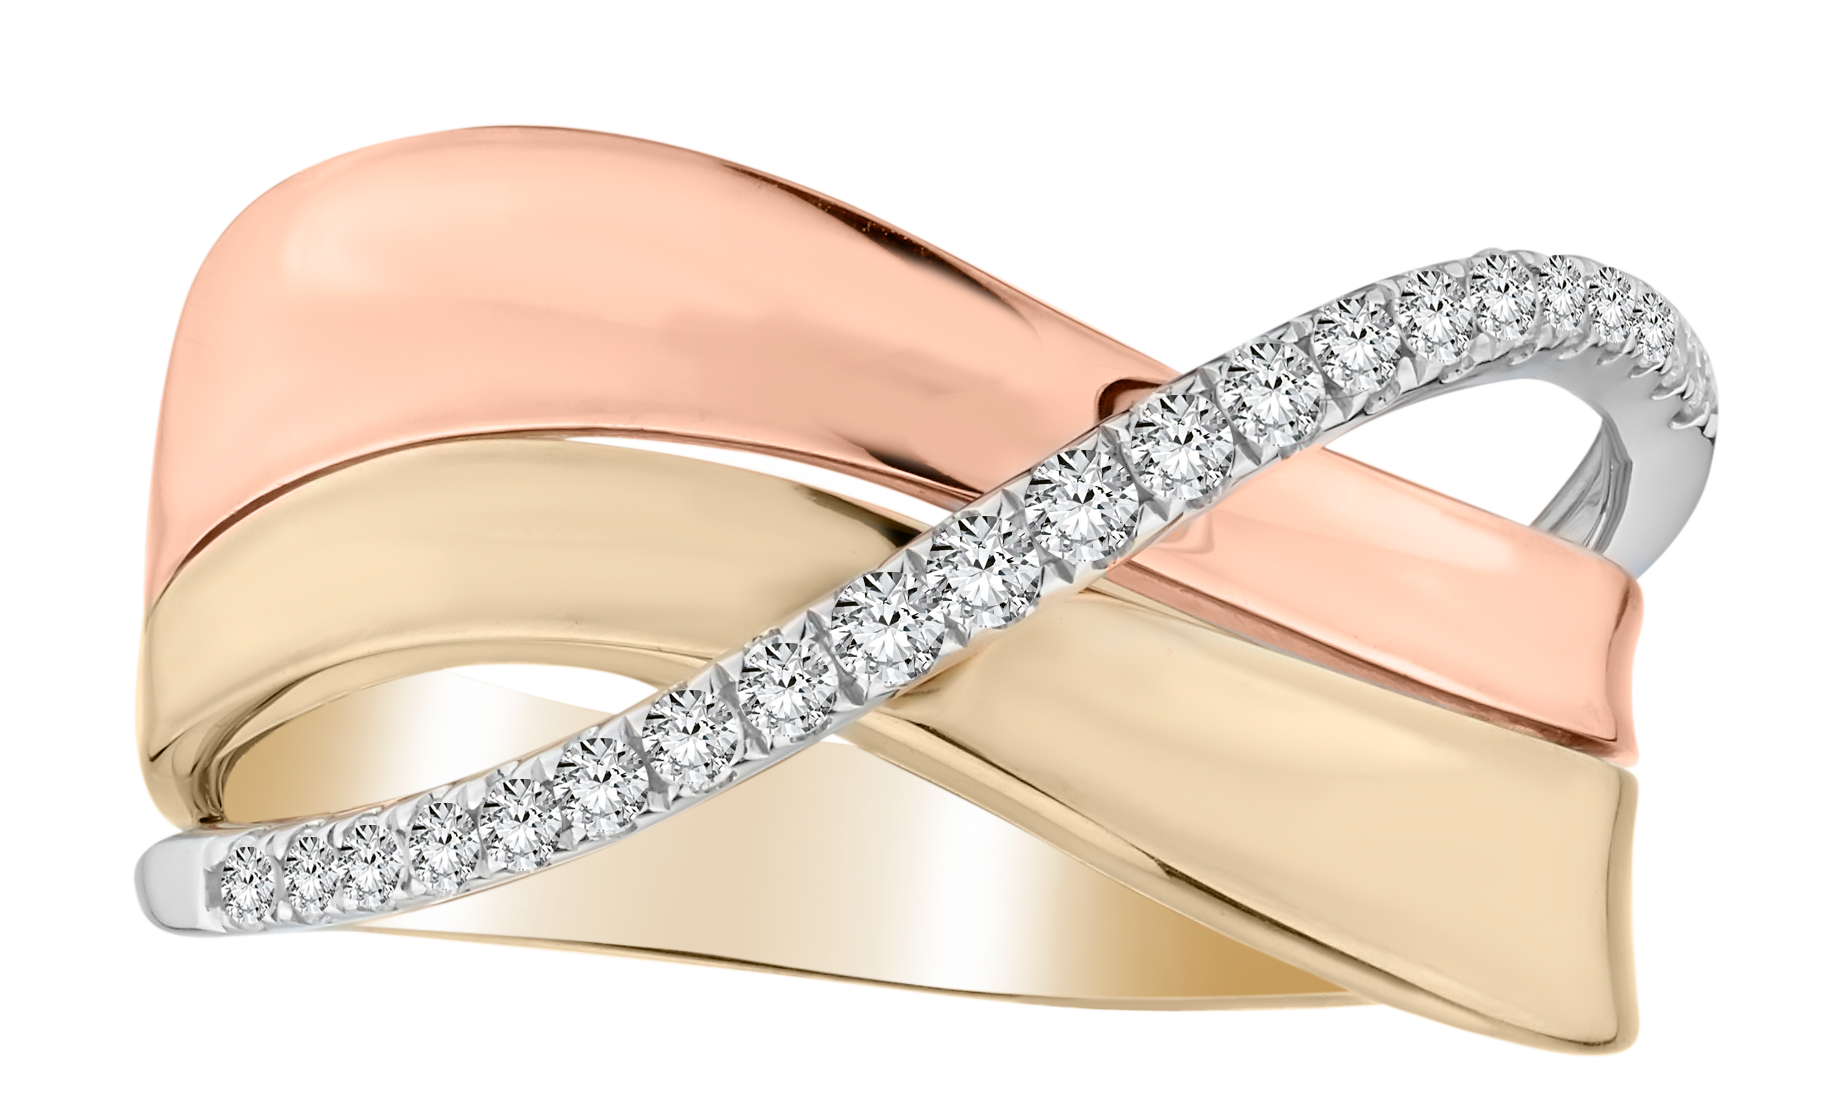 .20 Carat Diamond Ring, 10kt White, Yellow & Rose Gold (Tri-Colour). Fashion Rings. Griffin Jewellery Designs